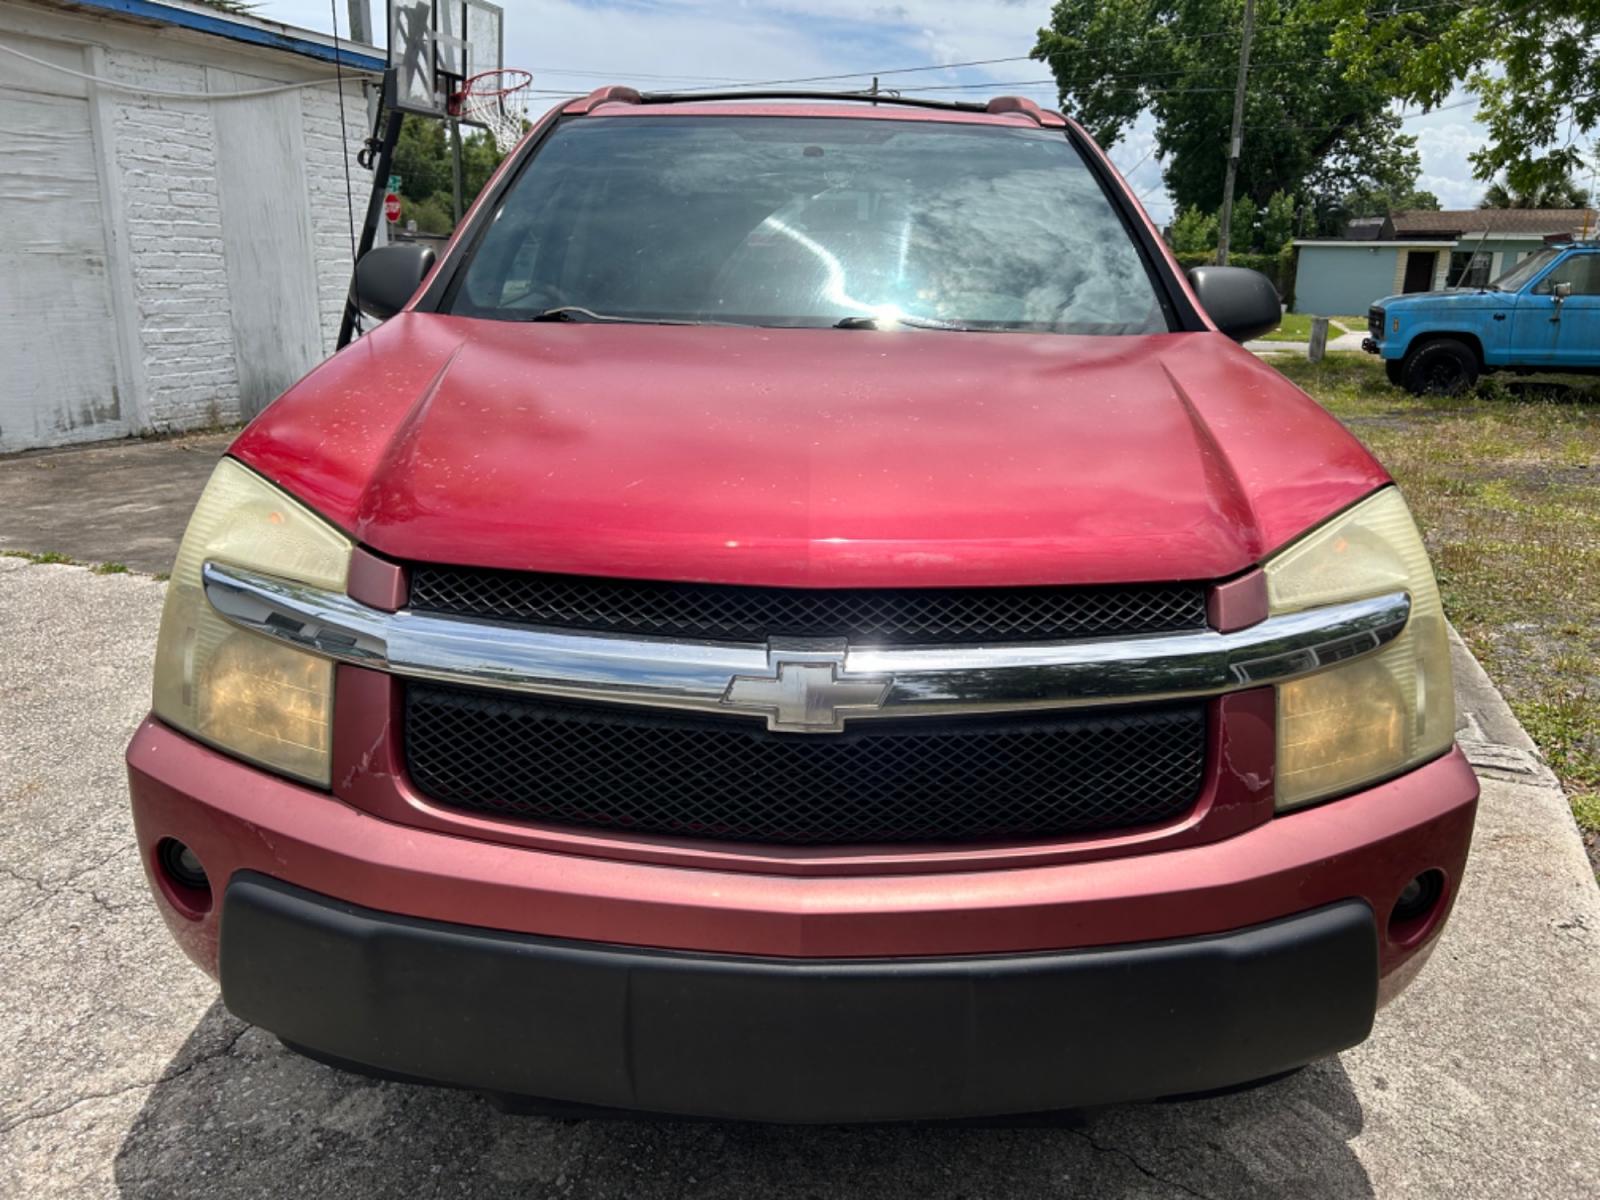 2005 Chevrolet Equinox (2CNDL63F156) , located at 1758 Cassat Ave., Jacksonville, FL, 32210, (904) 384-2799, 30.286720, -81.730652 - LOW MILEAGE!!!!! ONLY 86,523 MILES!!!!! 2005 CHEVROLET EQUINOX LT MODEL LEATHER 4-DOOR AUTOMATIC TRANSMSSION ICE COLD AIR CONDITIONING RUNS GREAT $3900.00 DON'T HESITATE OR THIS ONE WILL BE GONE CALL US @ 904-384-2799 - Photo #0